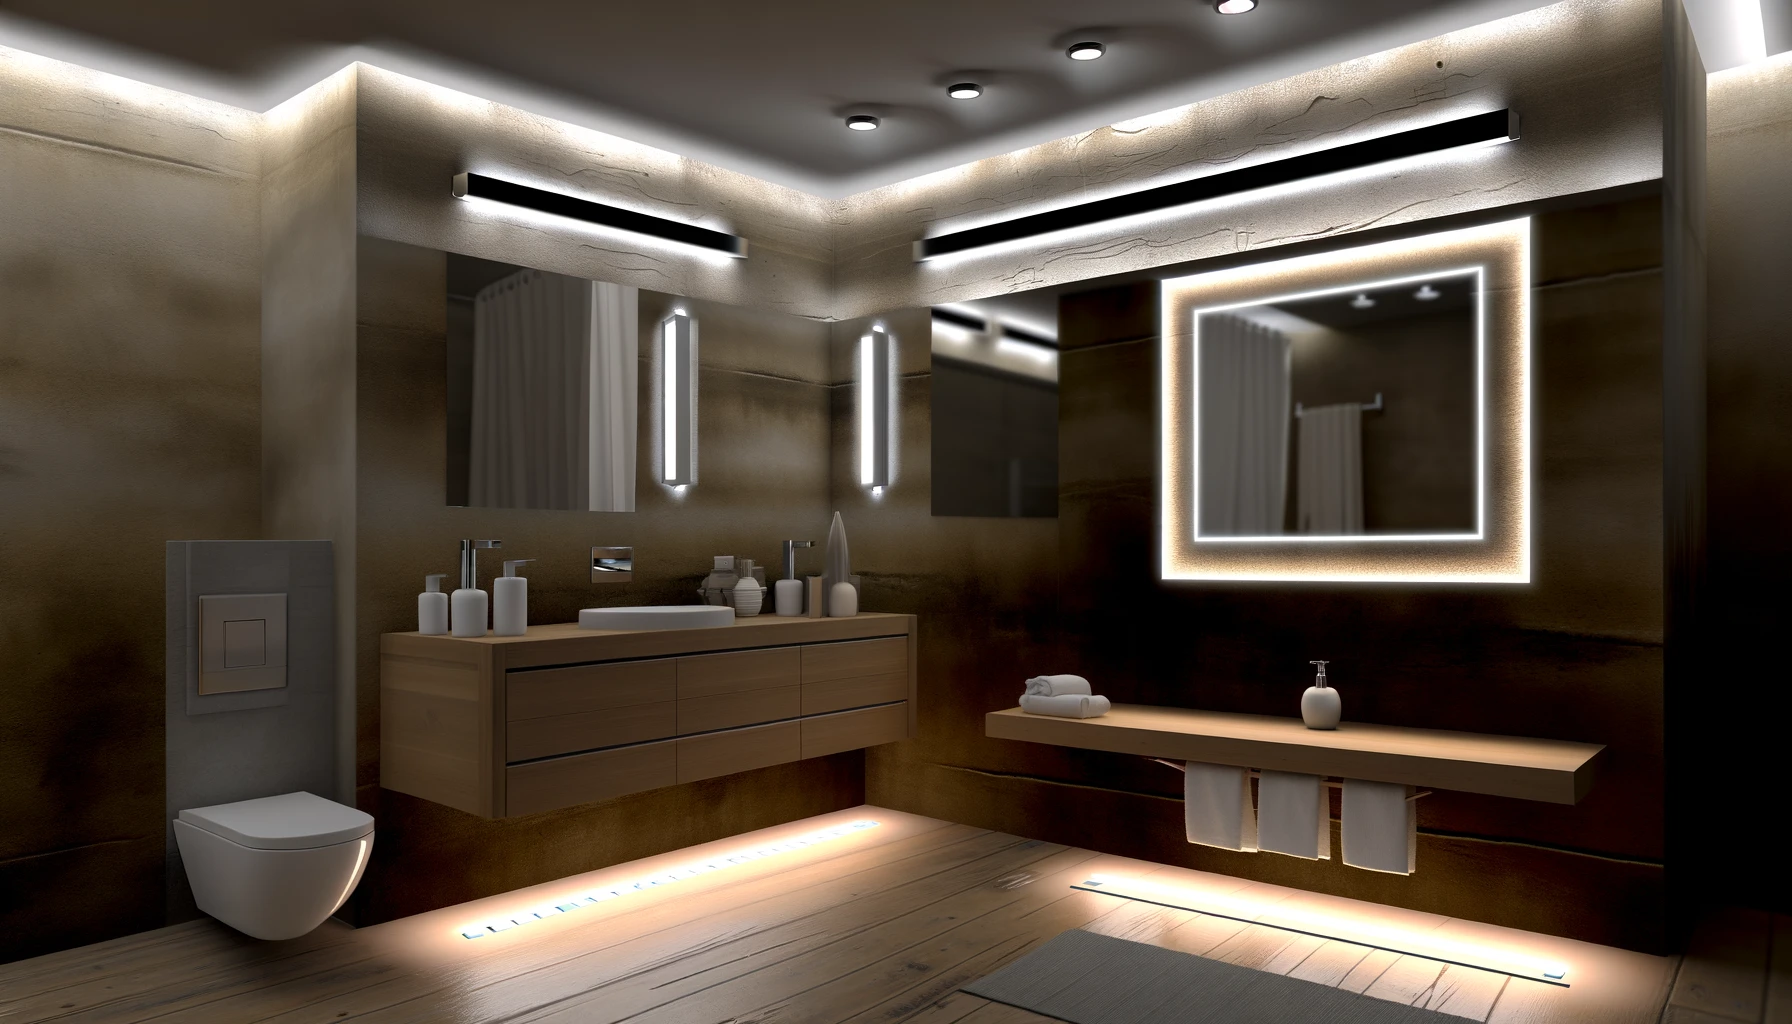 a beautifully renovated bathroom that combines rustic and modern elements, enhanced by innovative lighting solutions.